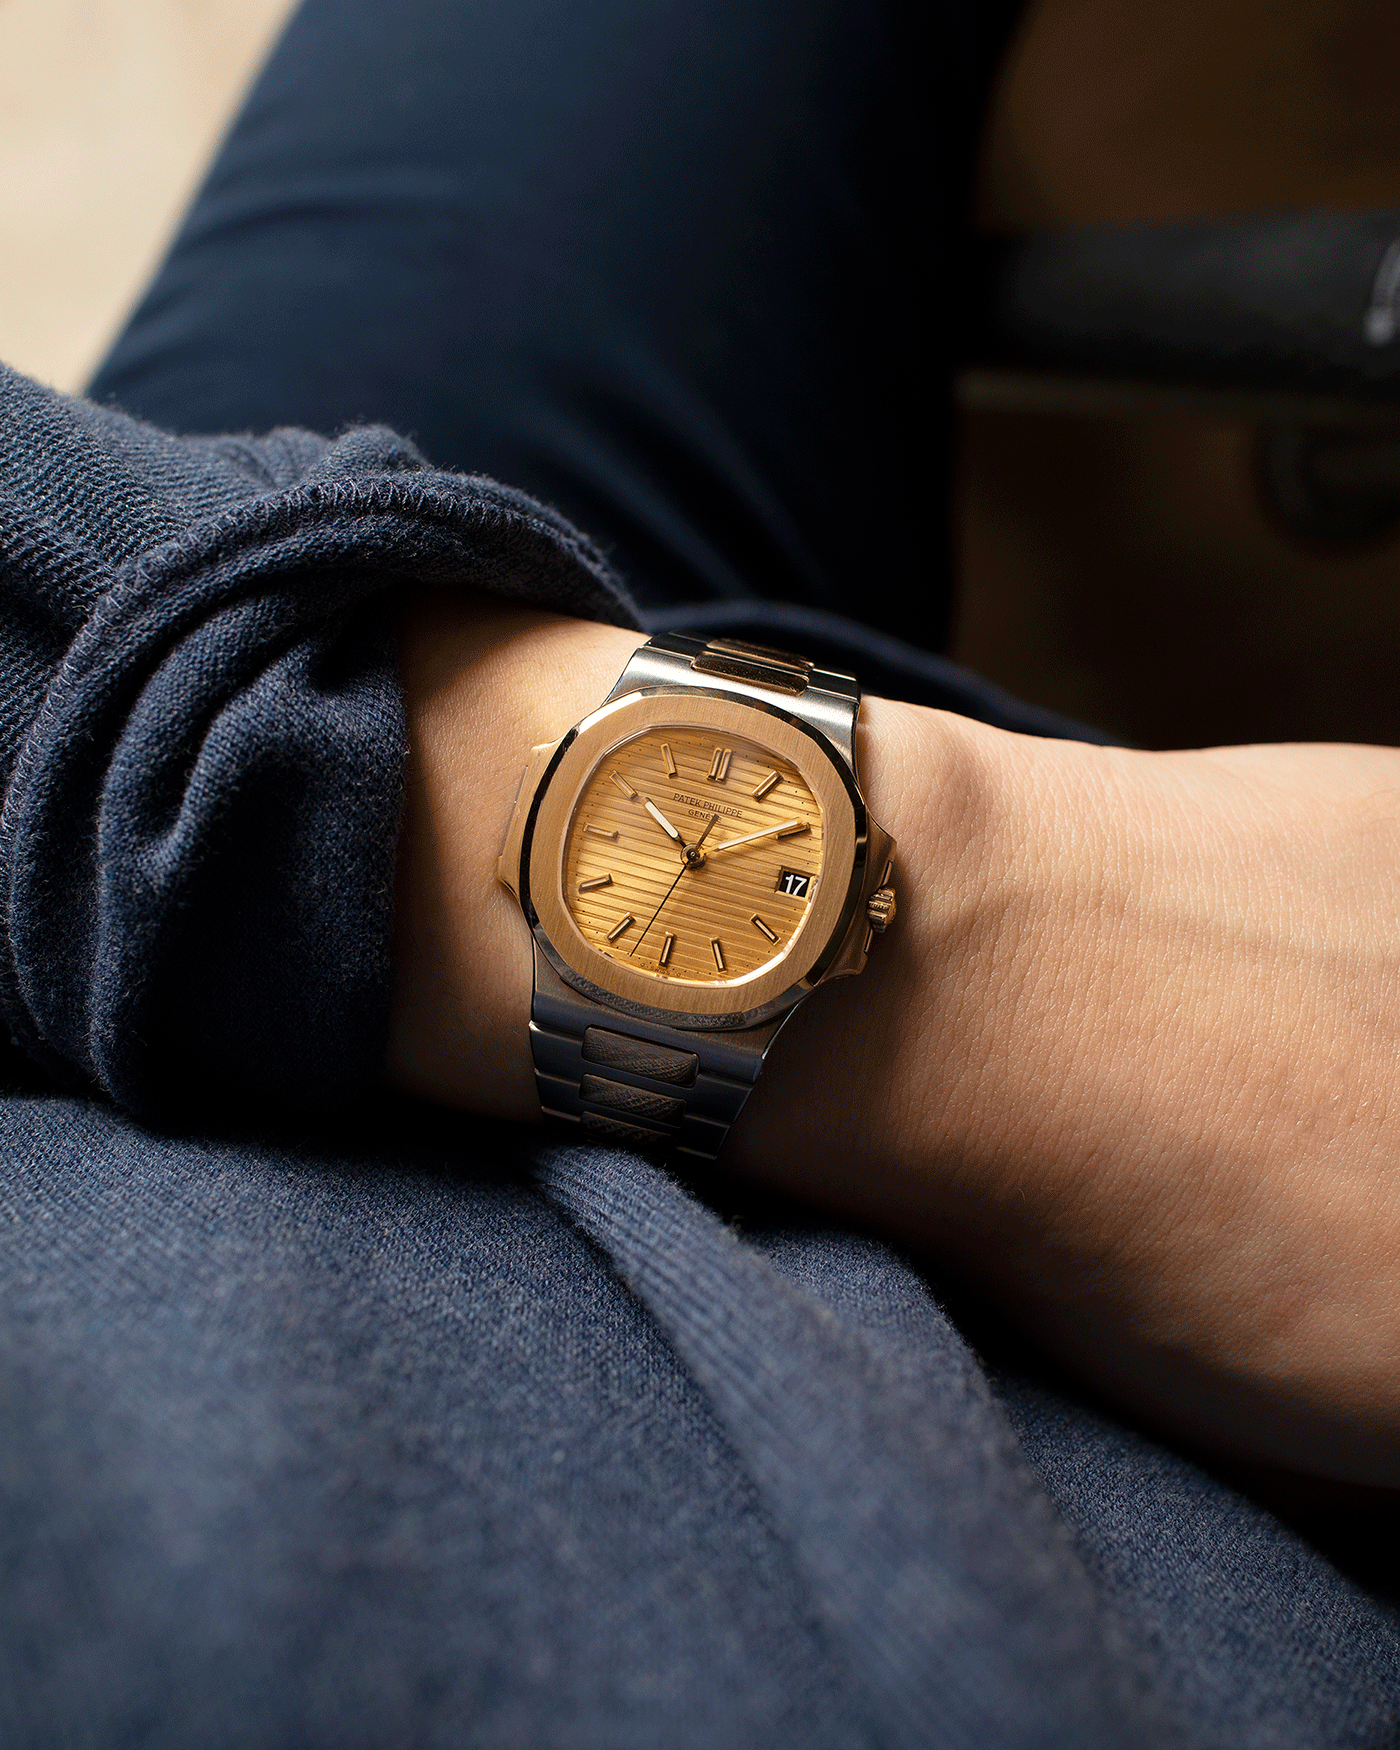 Brand: Patek Philippe Year: 1980’s Model: Nautilus Reference Number: 3800 Material: Stainless Steel and 18k Yellow Gold Movement: Calibre 335 SC Case Diameter: 38mm Bracelet: Patek Philippe Integrated Stainless Steel and 18k Yellow Gold Bracelet